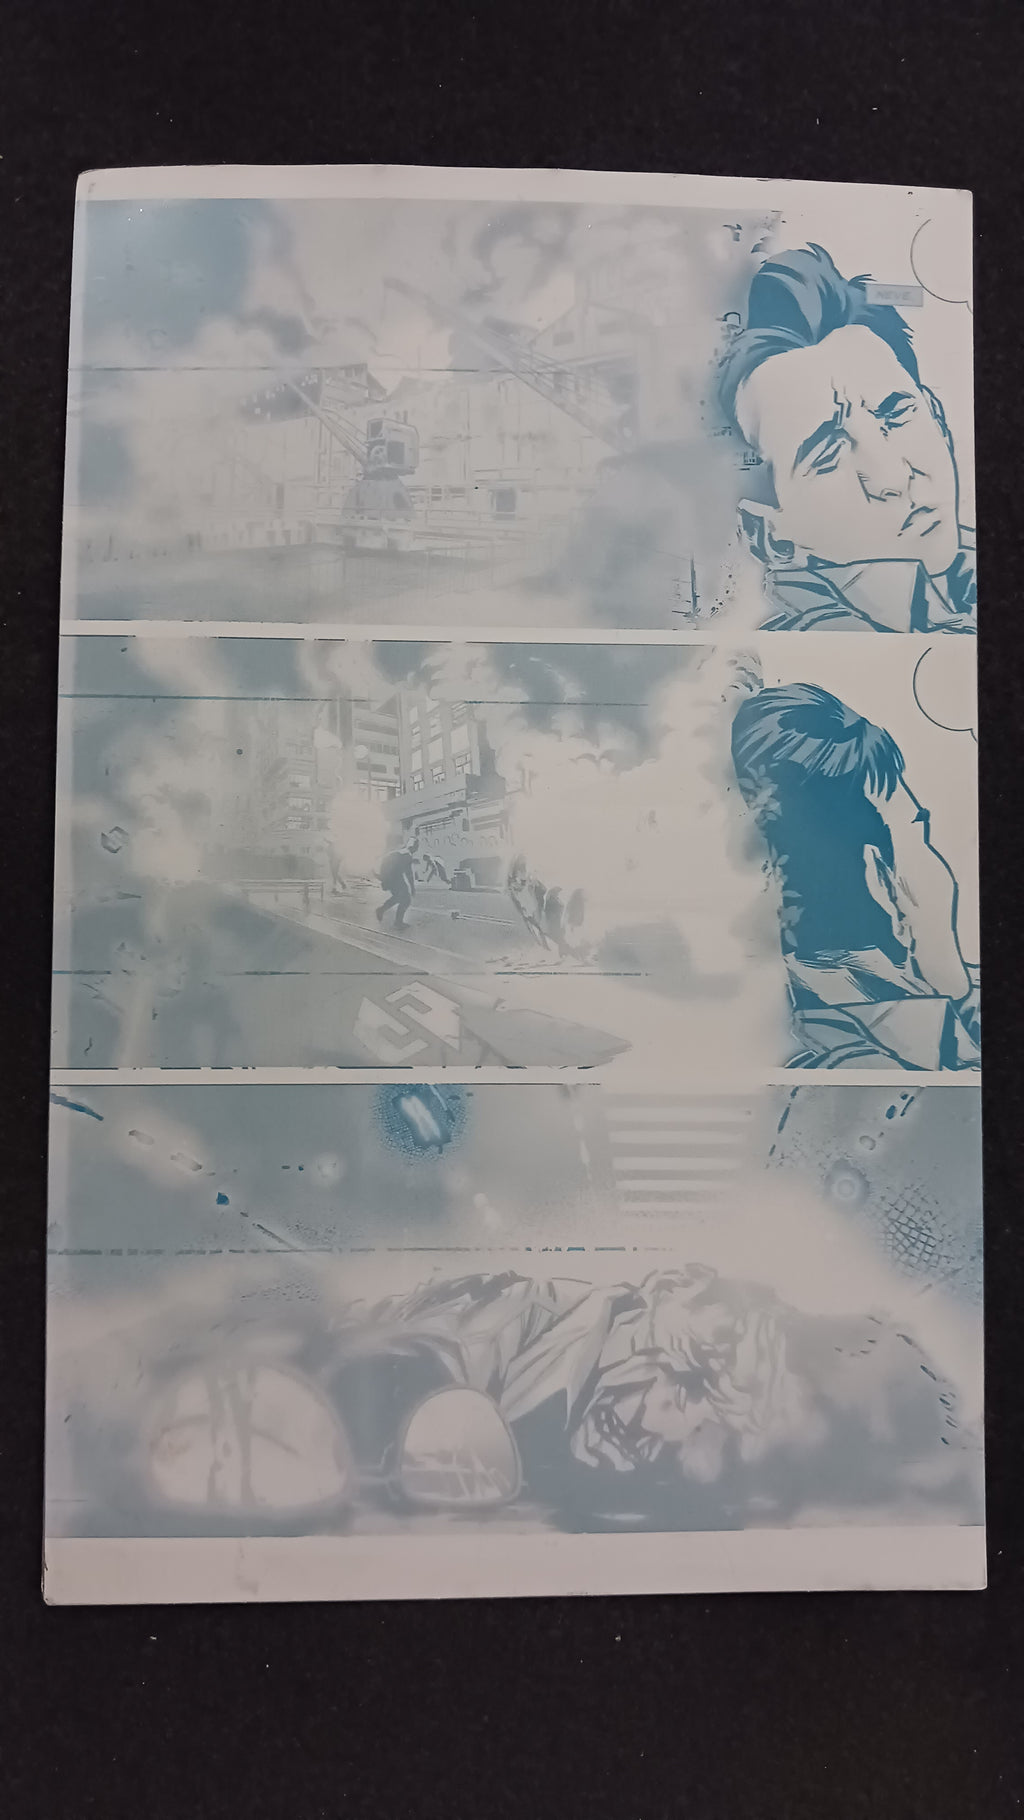 Category Zero Conflict #2 - Page 6 - PRESSWORKS - Comic Art - Printer Plate - Cyan